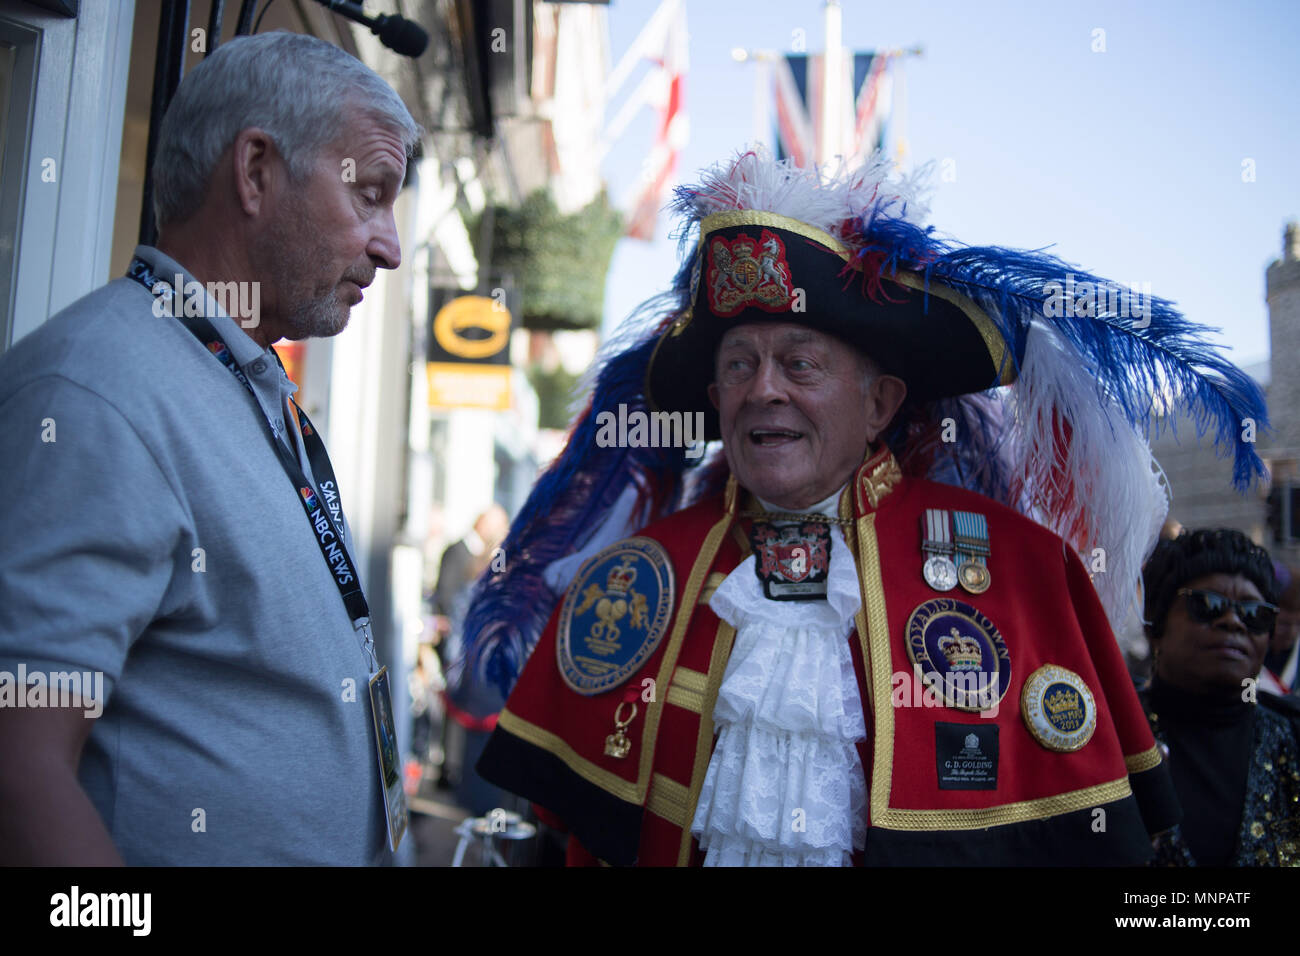 Windsor, Bershire, UK. 19th May, 2018. The Windsor Town Crier is seen along the route of the wedding procession of Prince Harry and Meghan Markle. Credit: Michael Candelori/ZUMA Wire/Alamy Live News Stock Photo